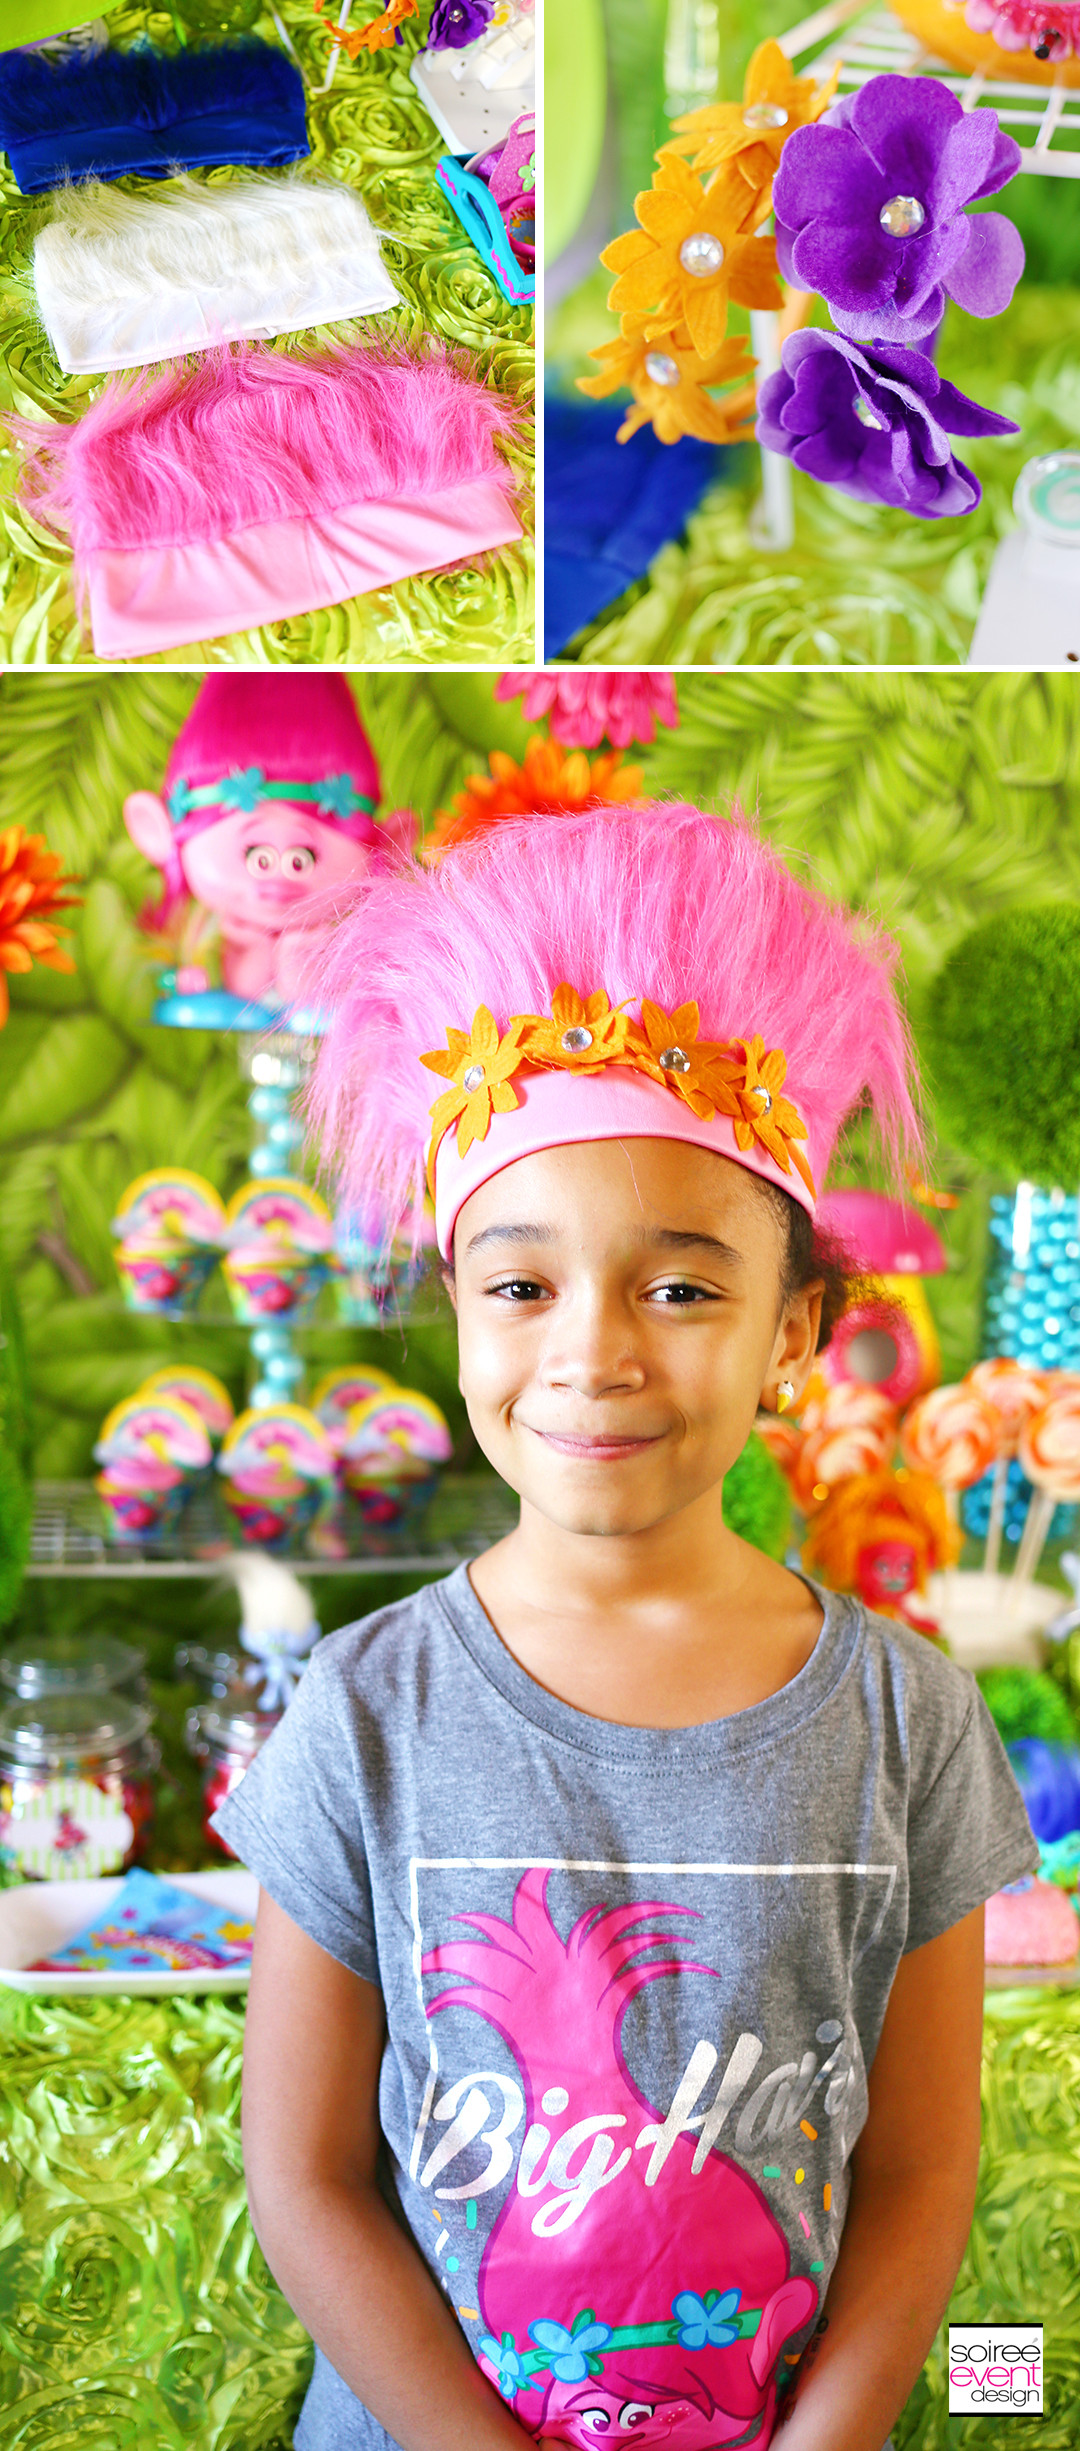 Trolls Diy Party Ideas
 TREND ALERT Host a Trolls Party with these Trolls Party